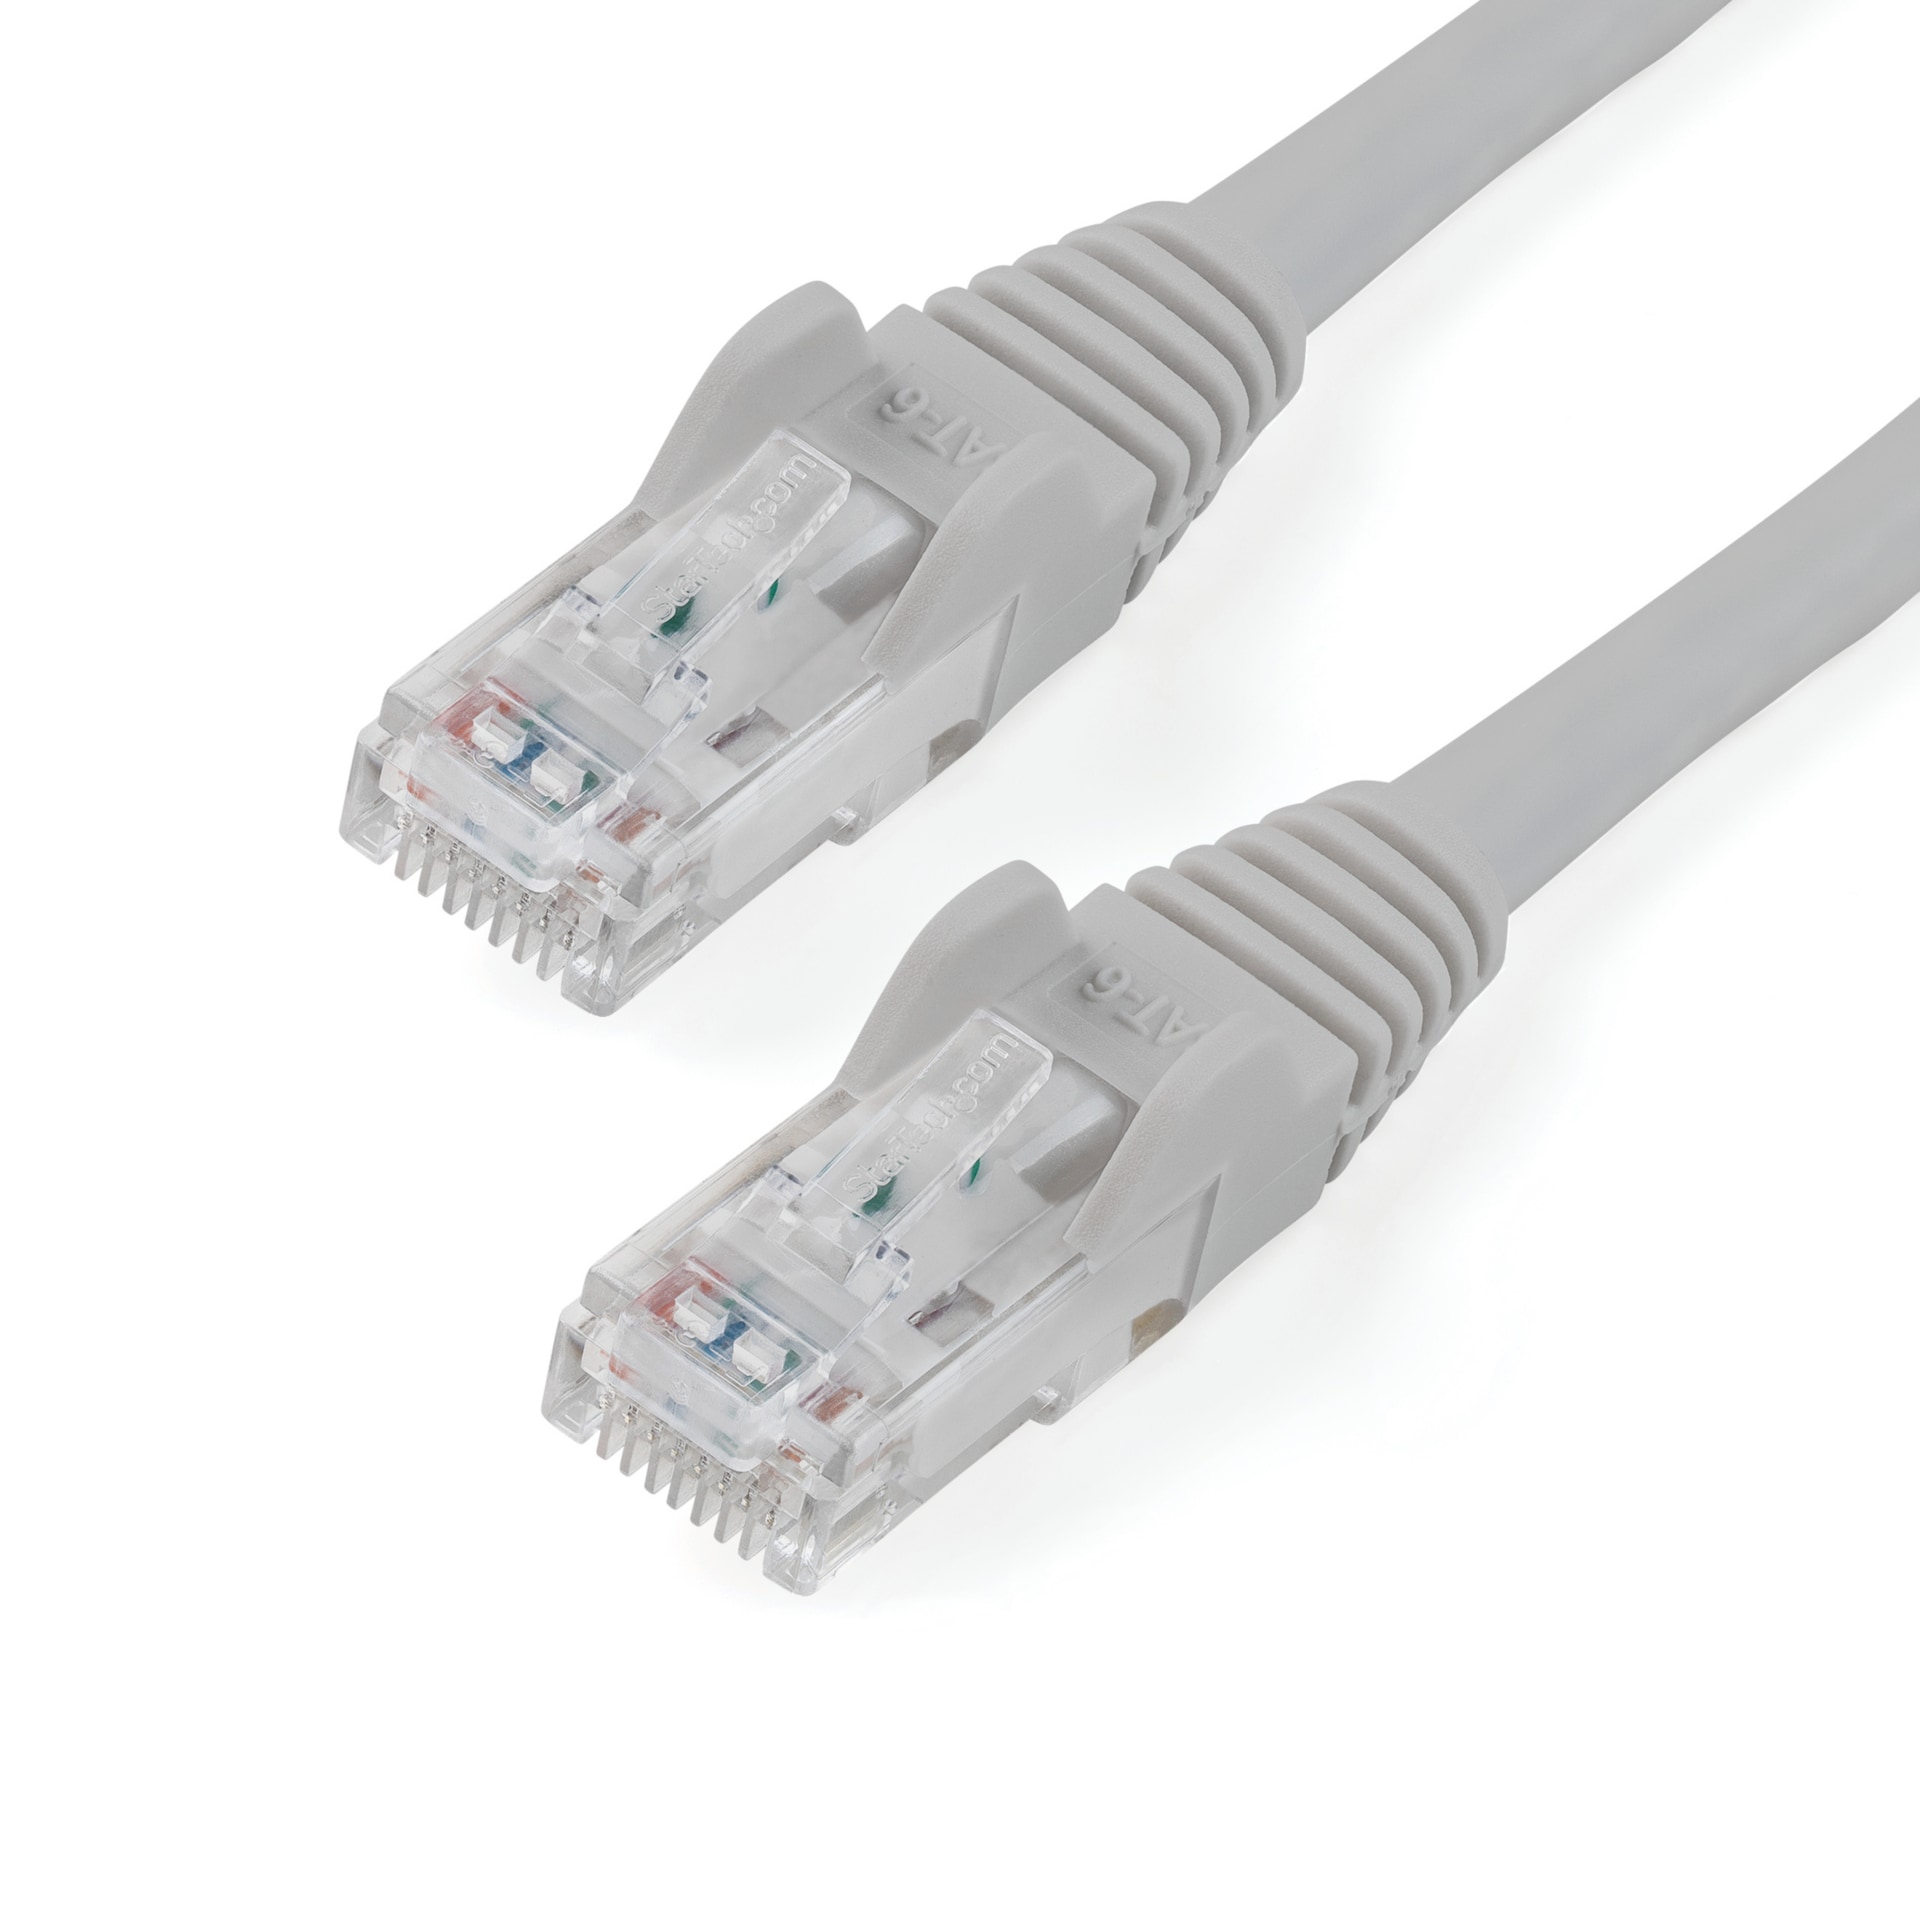 StarTech.com 6ft CAT6 Ethernet Cable Gray Snagless UTP CAT 6 Gigabit Cord/Wire 100W PoE 650MHz